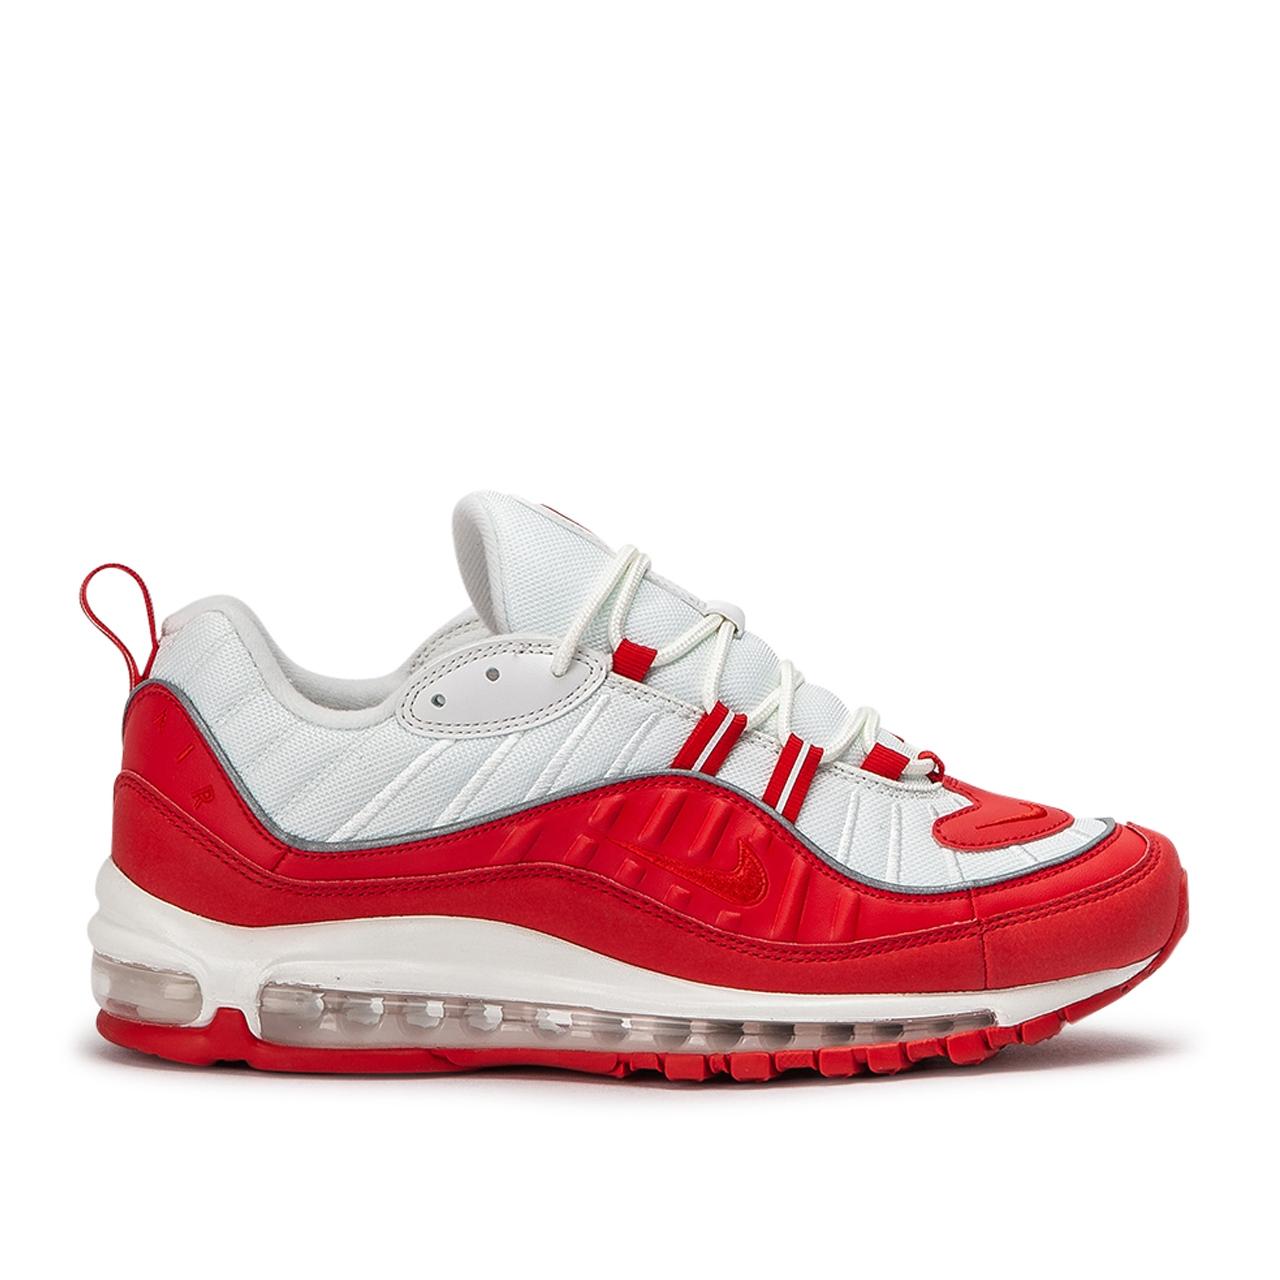 Nike Leather Air Max 98 in White/Red (Red) for Men - Save 92% - Lyst